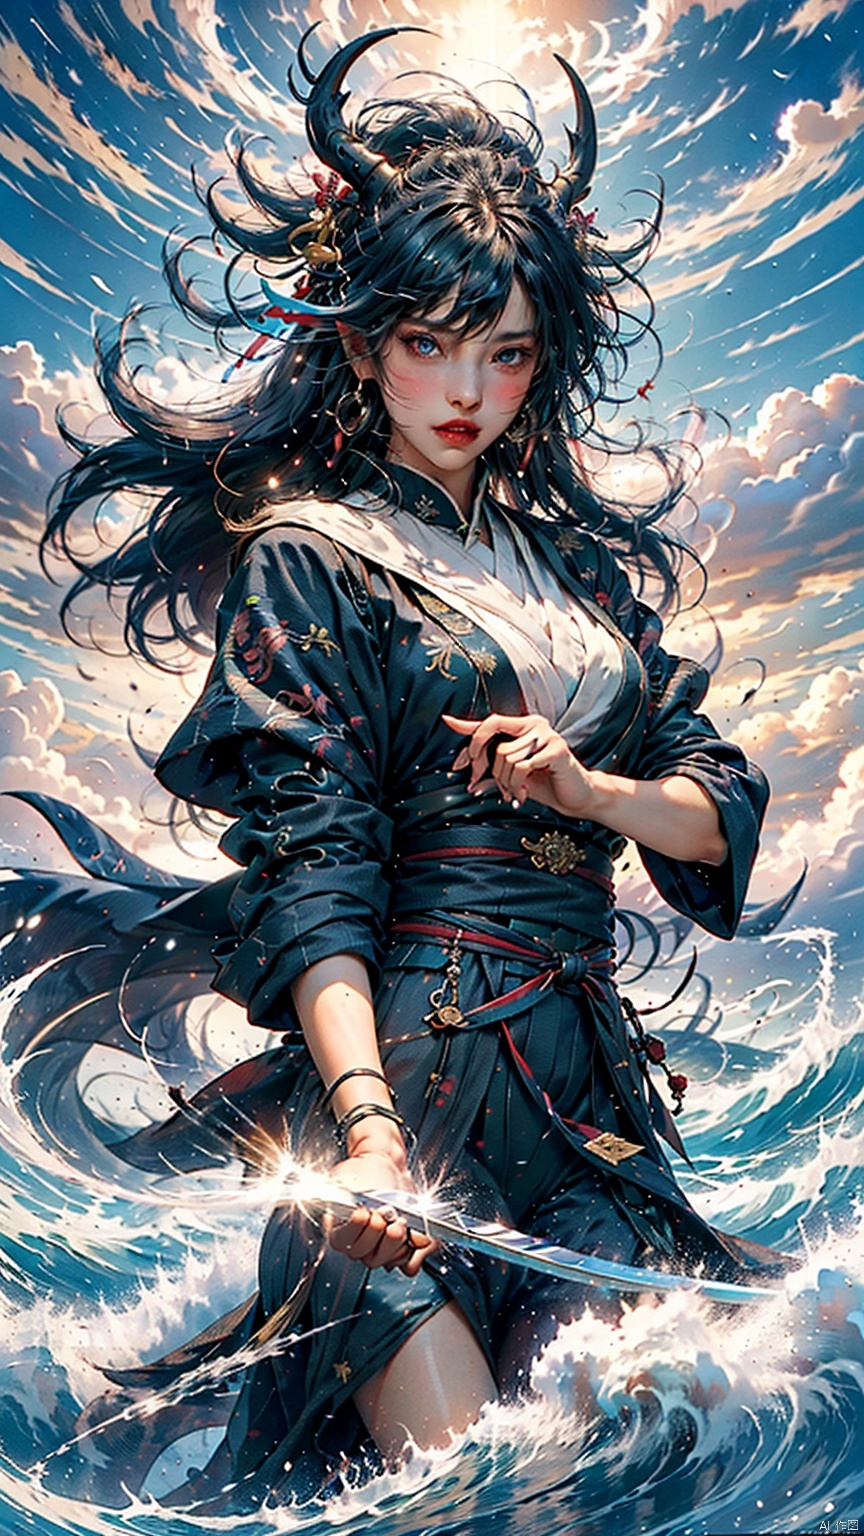 1Girl, (Head Up) (Positive Light) Female Focus, (Long Hair) Lightness Skill, Imperial Sword (Straight Sword) (Thunderbolt and Whirlwind)
Red lips, bangs, earrings, kimono, Chinese cardigan, print, tassels, with a dragon background,
Chinese architecture, shrouded in clouds and mist, with ethereal aura and Taoist runes